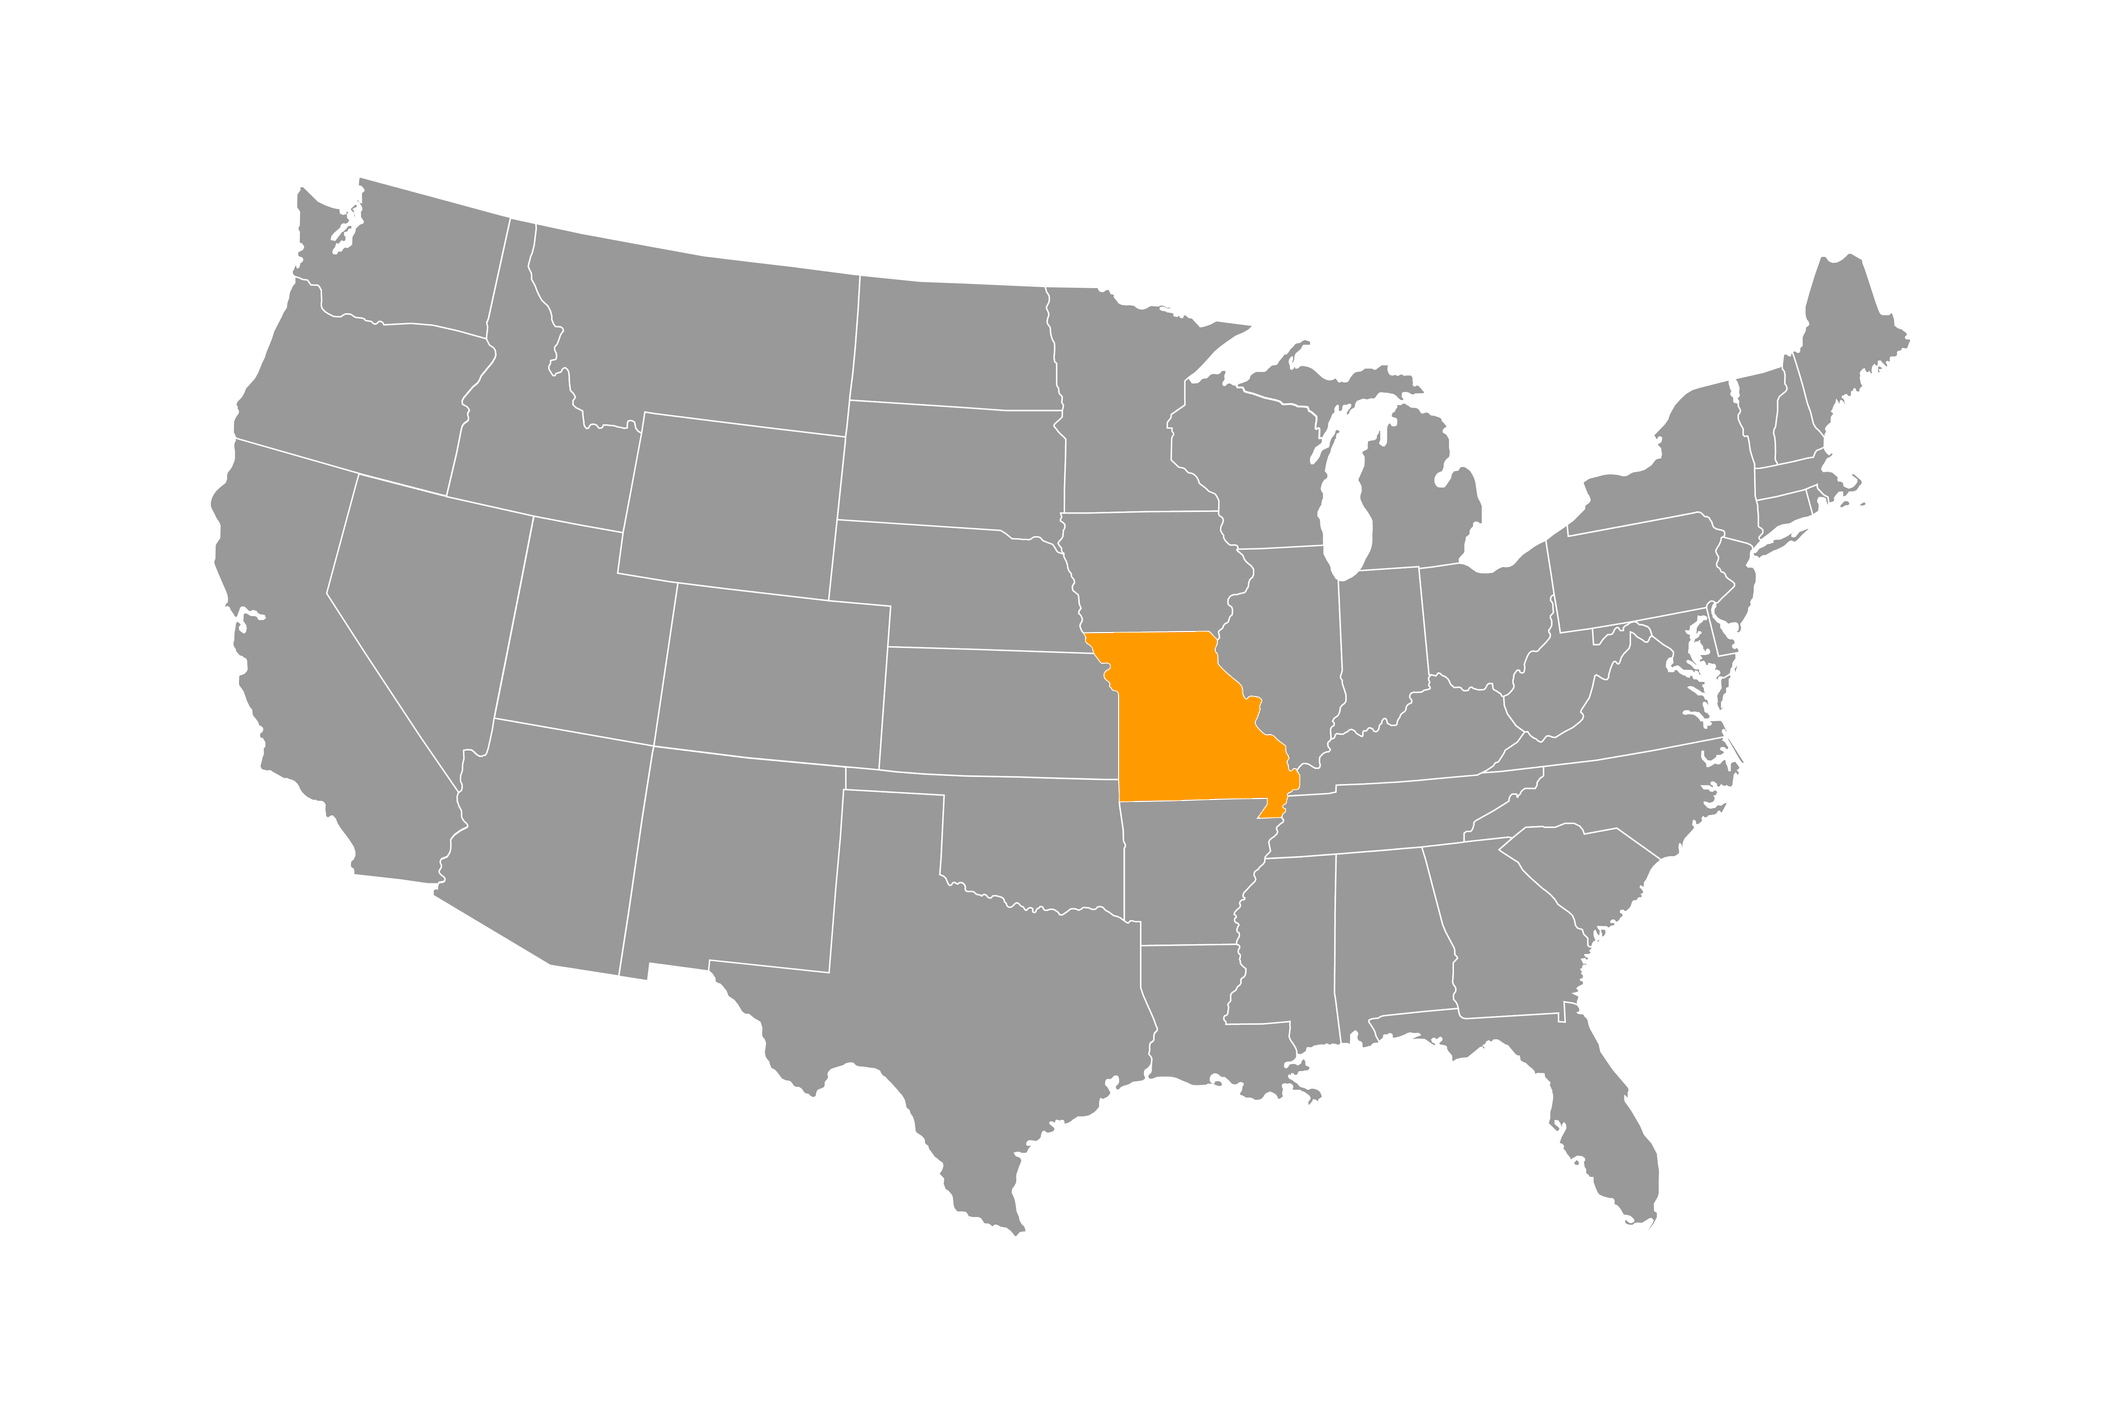 A map of the United States with Missouri highlighted in orange